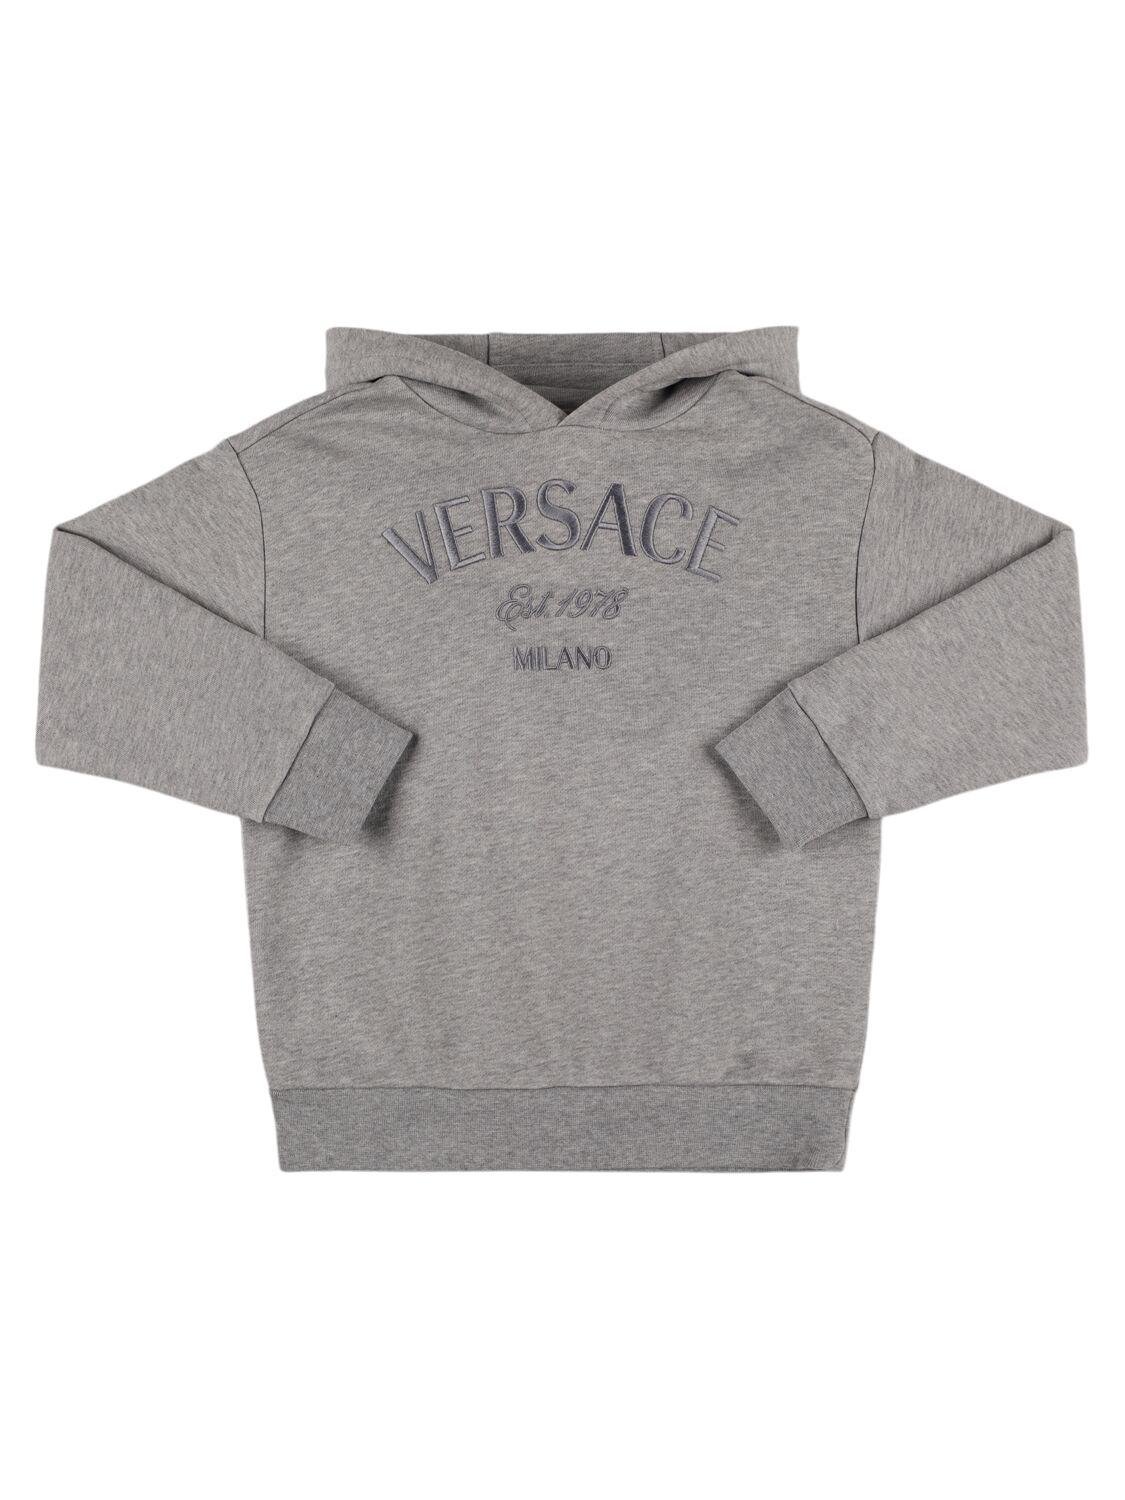 Embroidered Hooded Sweatshirt by VERSACE